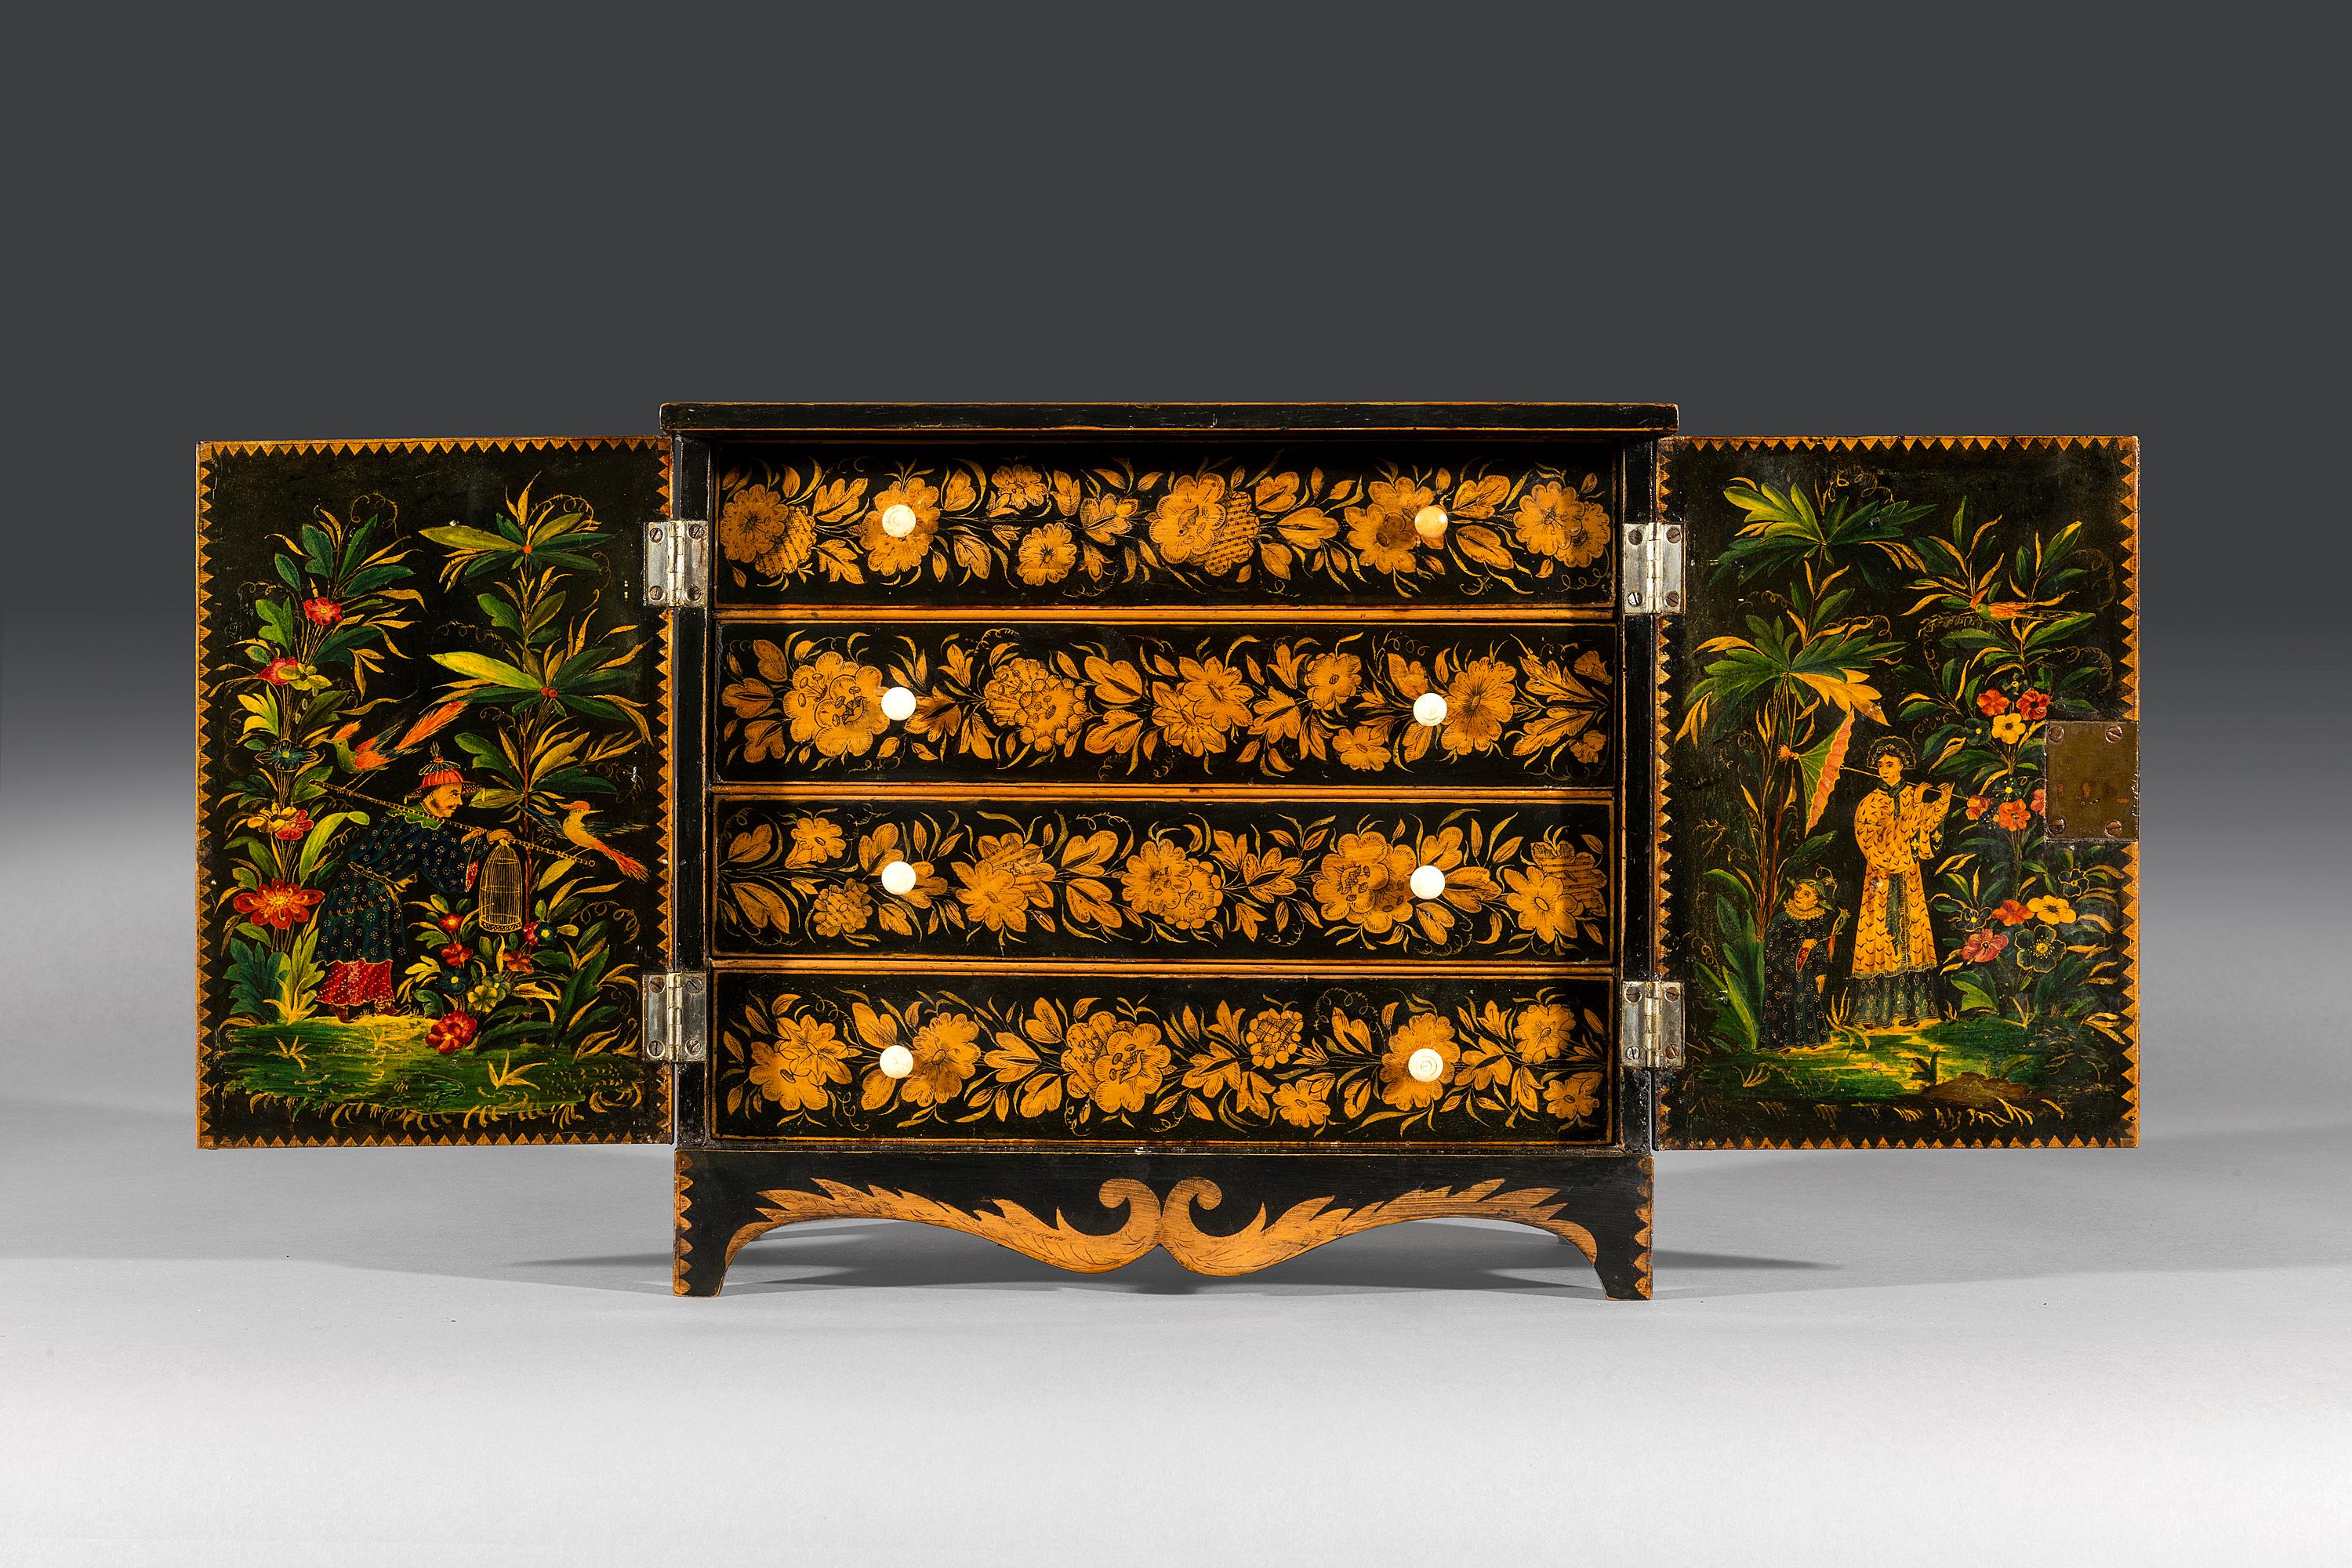 Regency Period Polychrome Penwork Chinoiserie Table Cabinet  In Good Condition For Sale In Bradford on Avon, GB